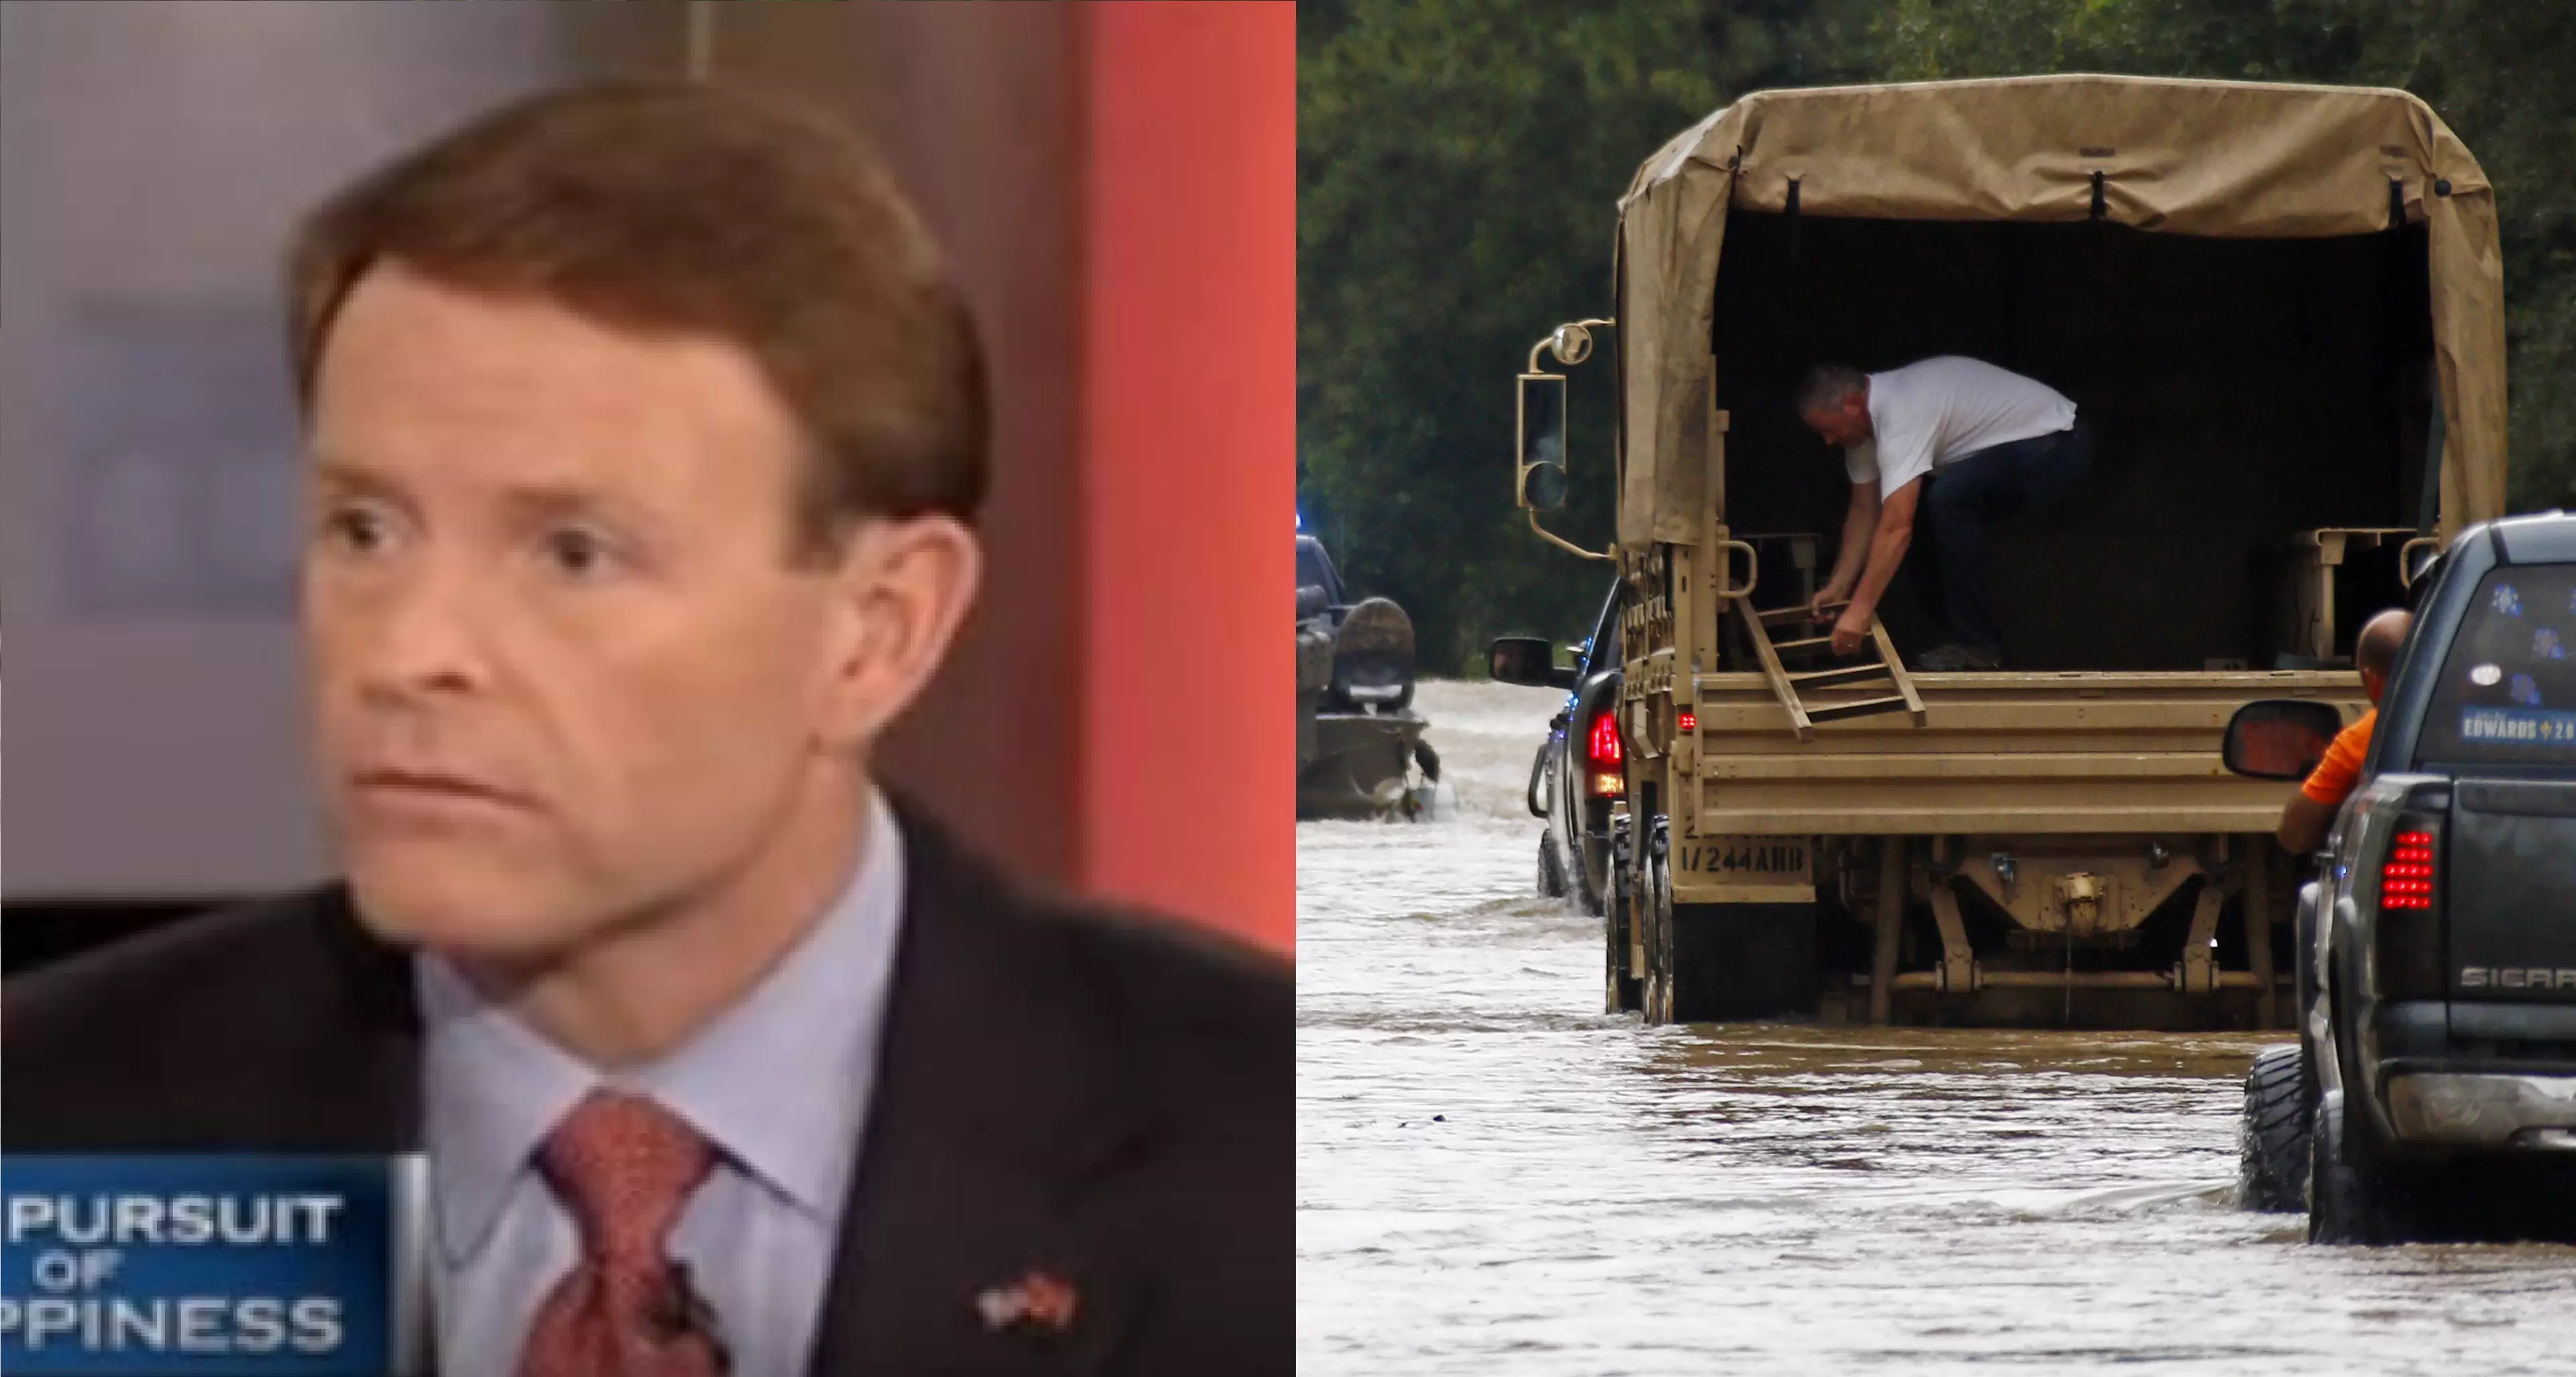 Home Of Man Who Believes That Gays Were Responsible For Floods Gets... Flooded